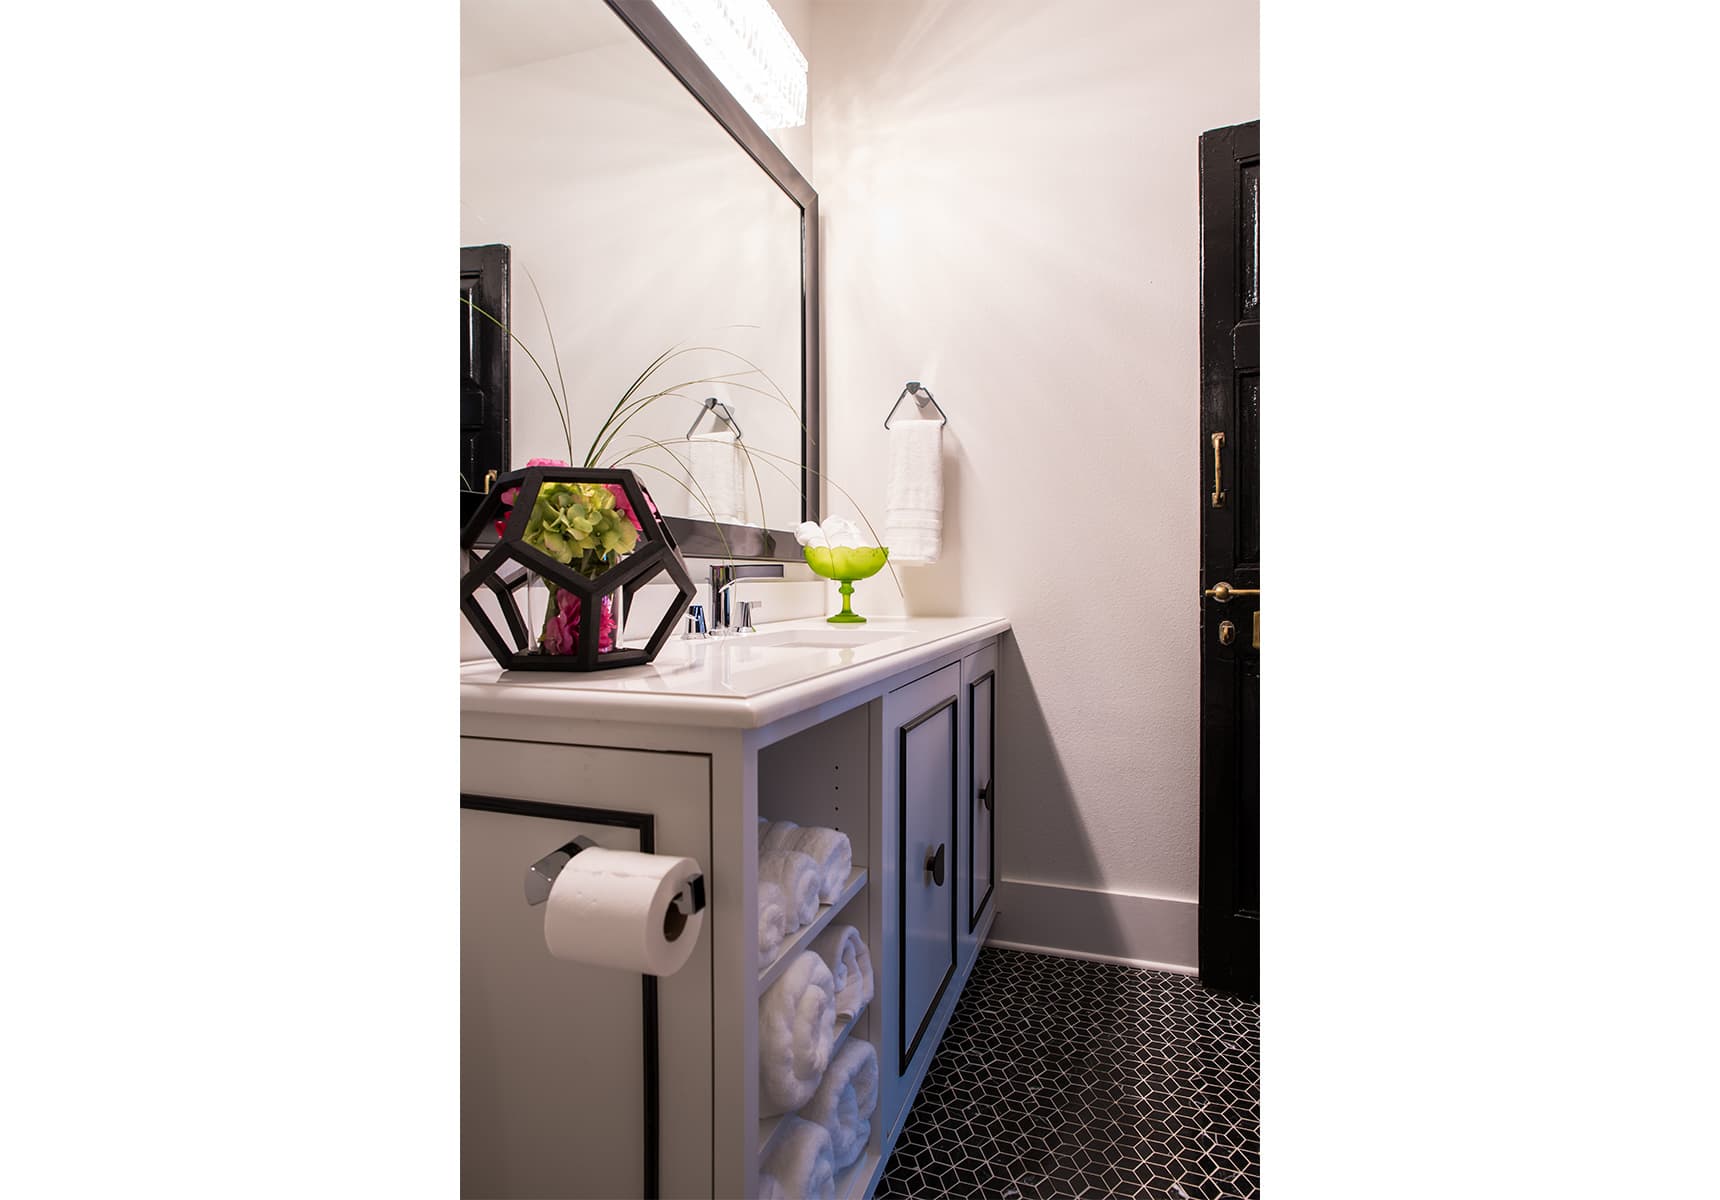 Bathroom counter and sink with large mirror and hexagonal flower vase